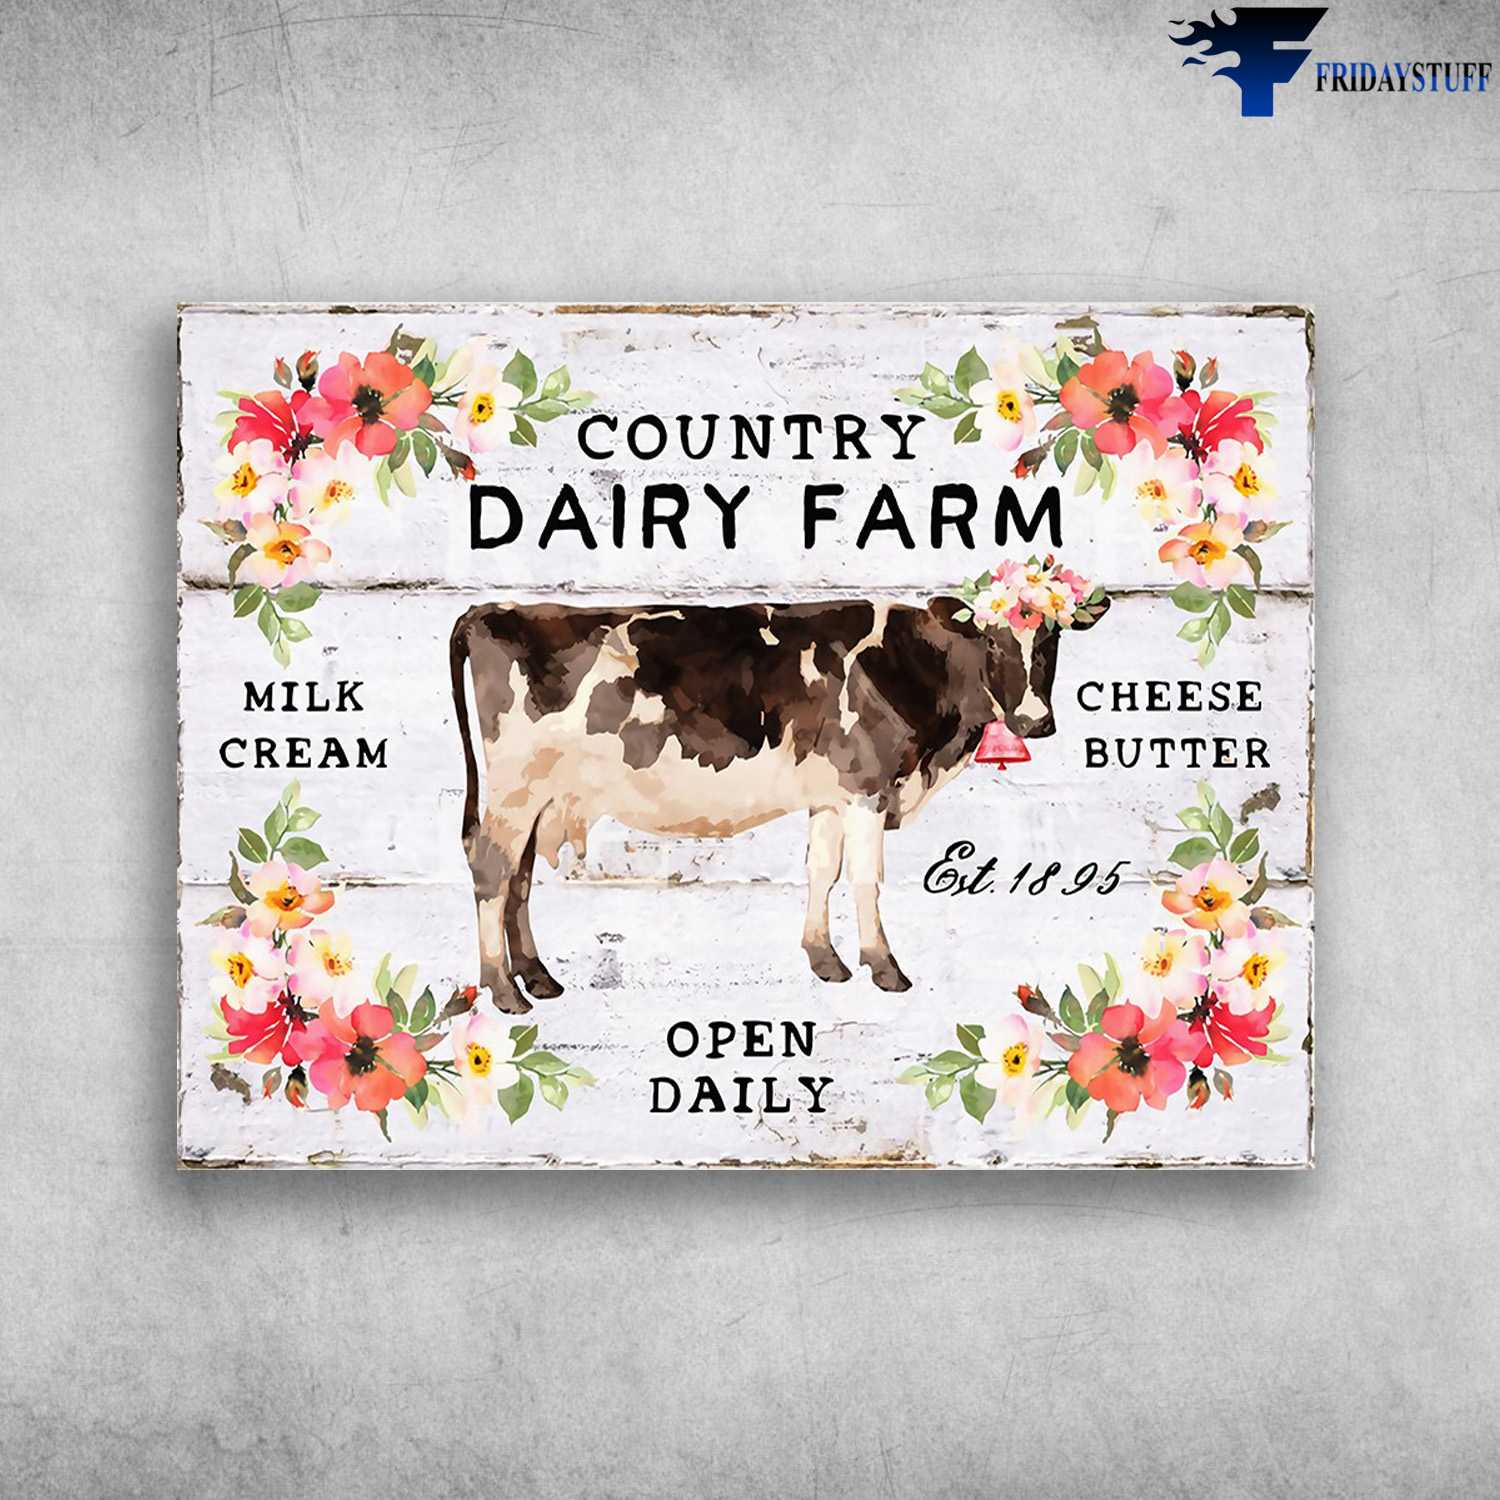 Dairy Cow, Farmer Poster - Country Dairy Farm, Milk Cream, Cheese Butter, Open Daily